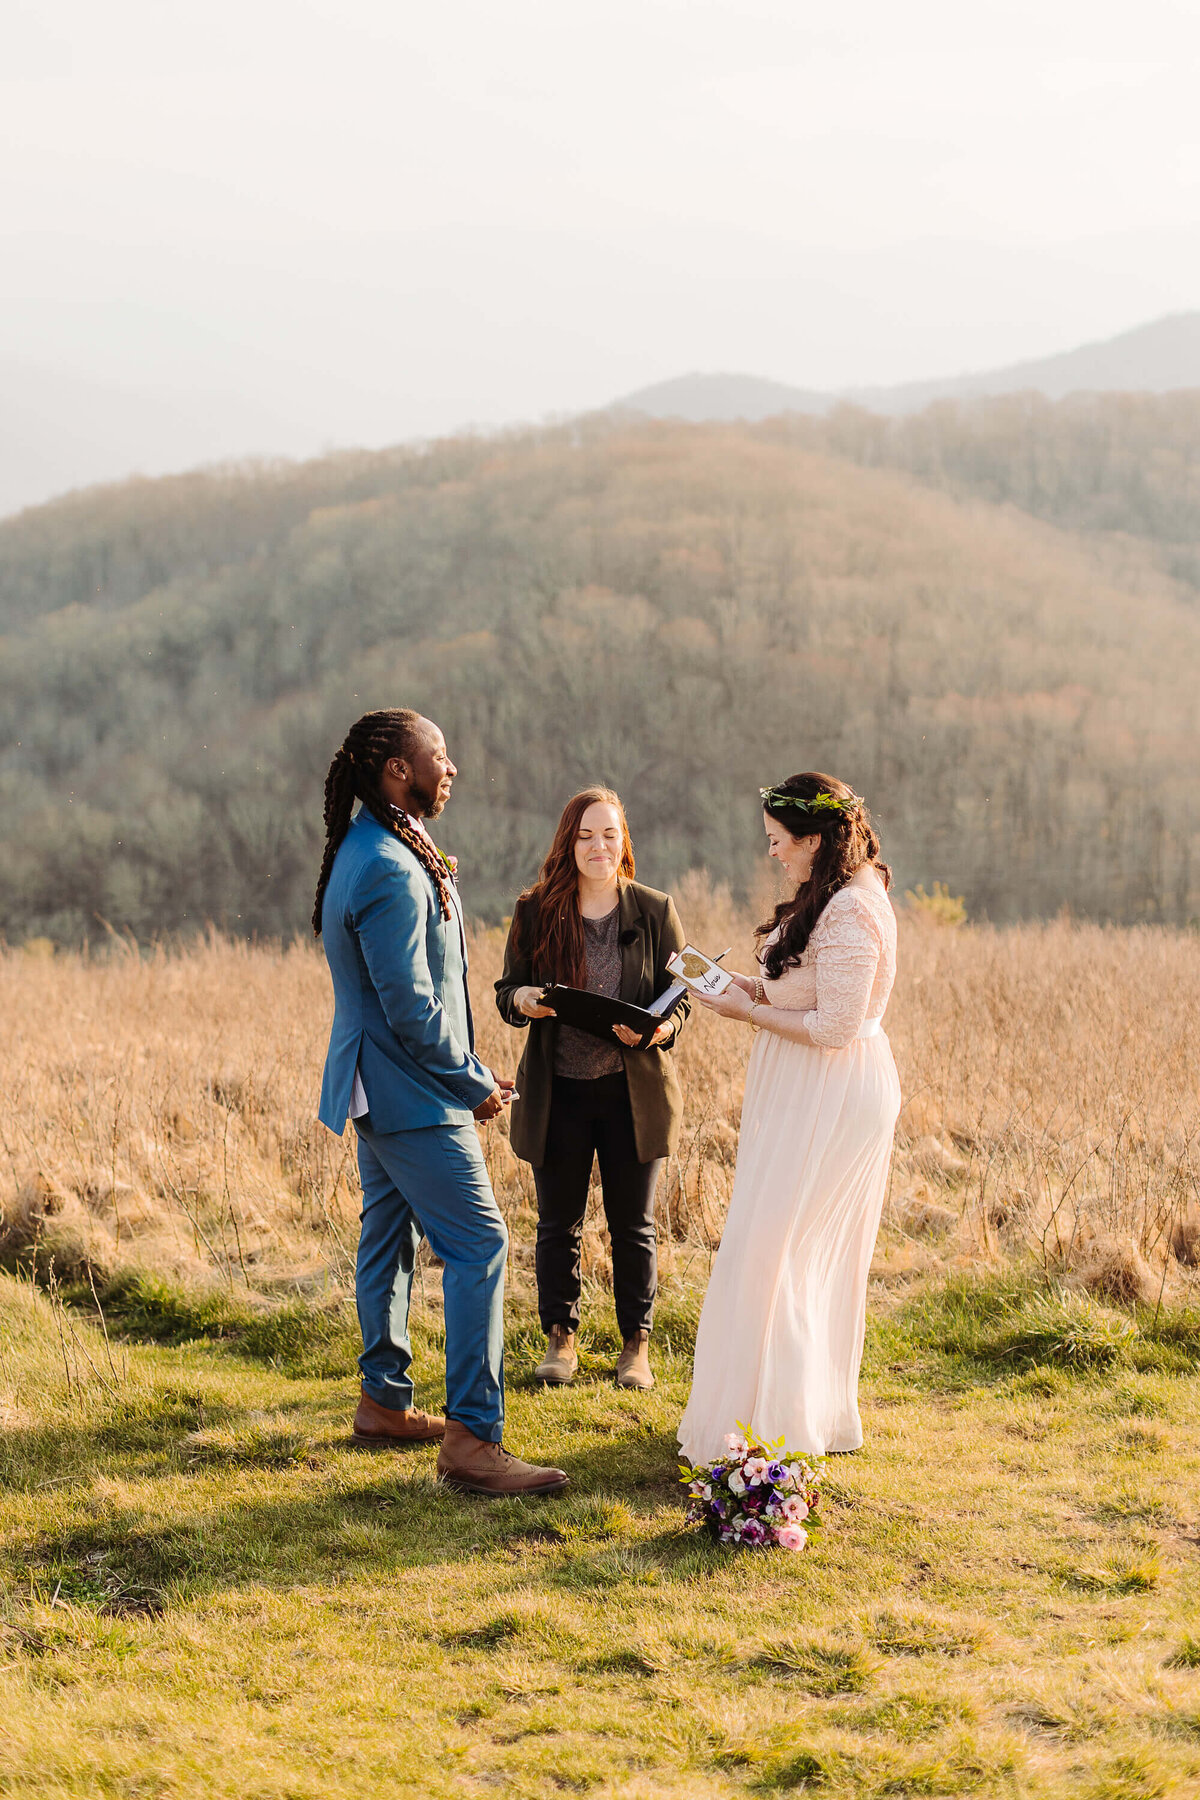 Max-Patch-Sunset-Mountain-Elopement-21